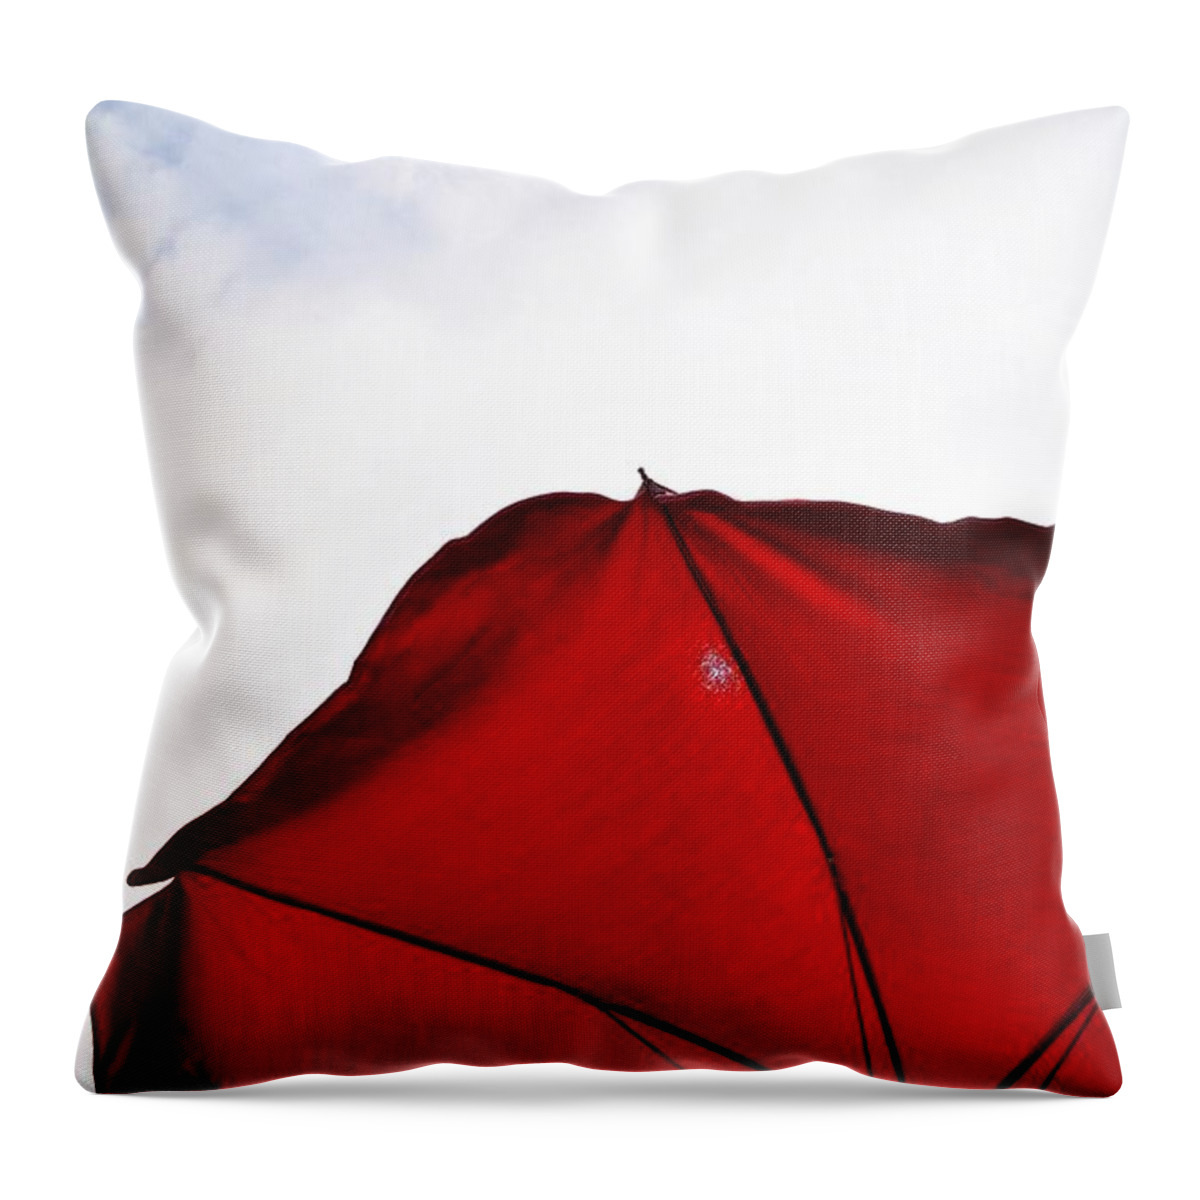 Red Throw Pillow featuring the photograph Red Parasol by Koji Nakagawa